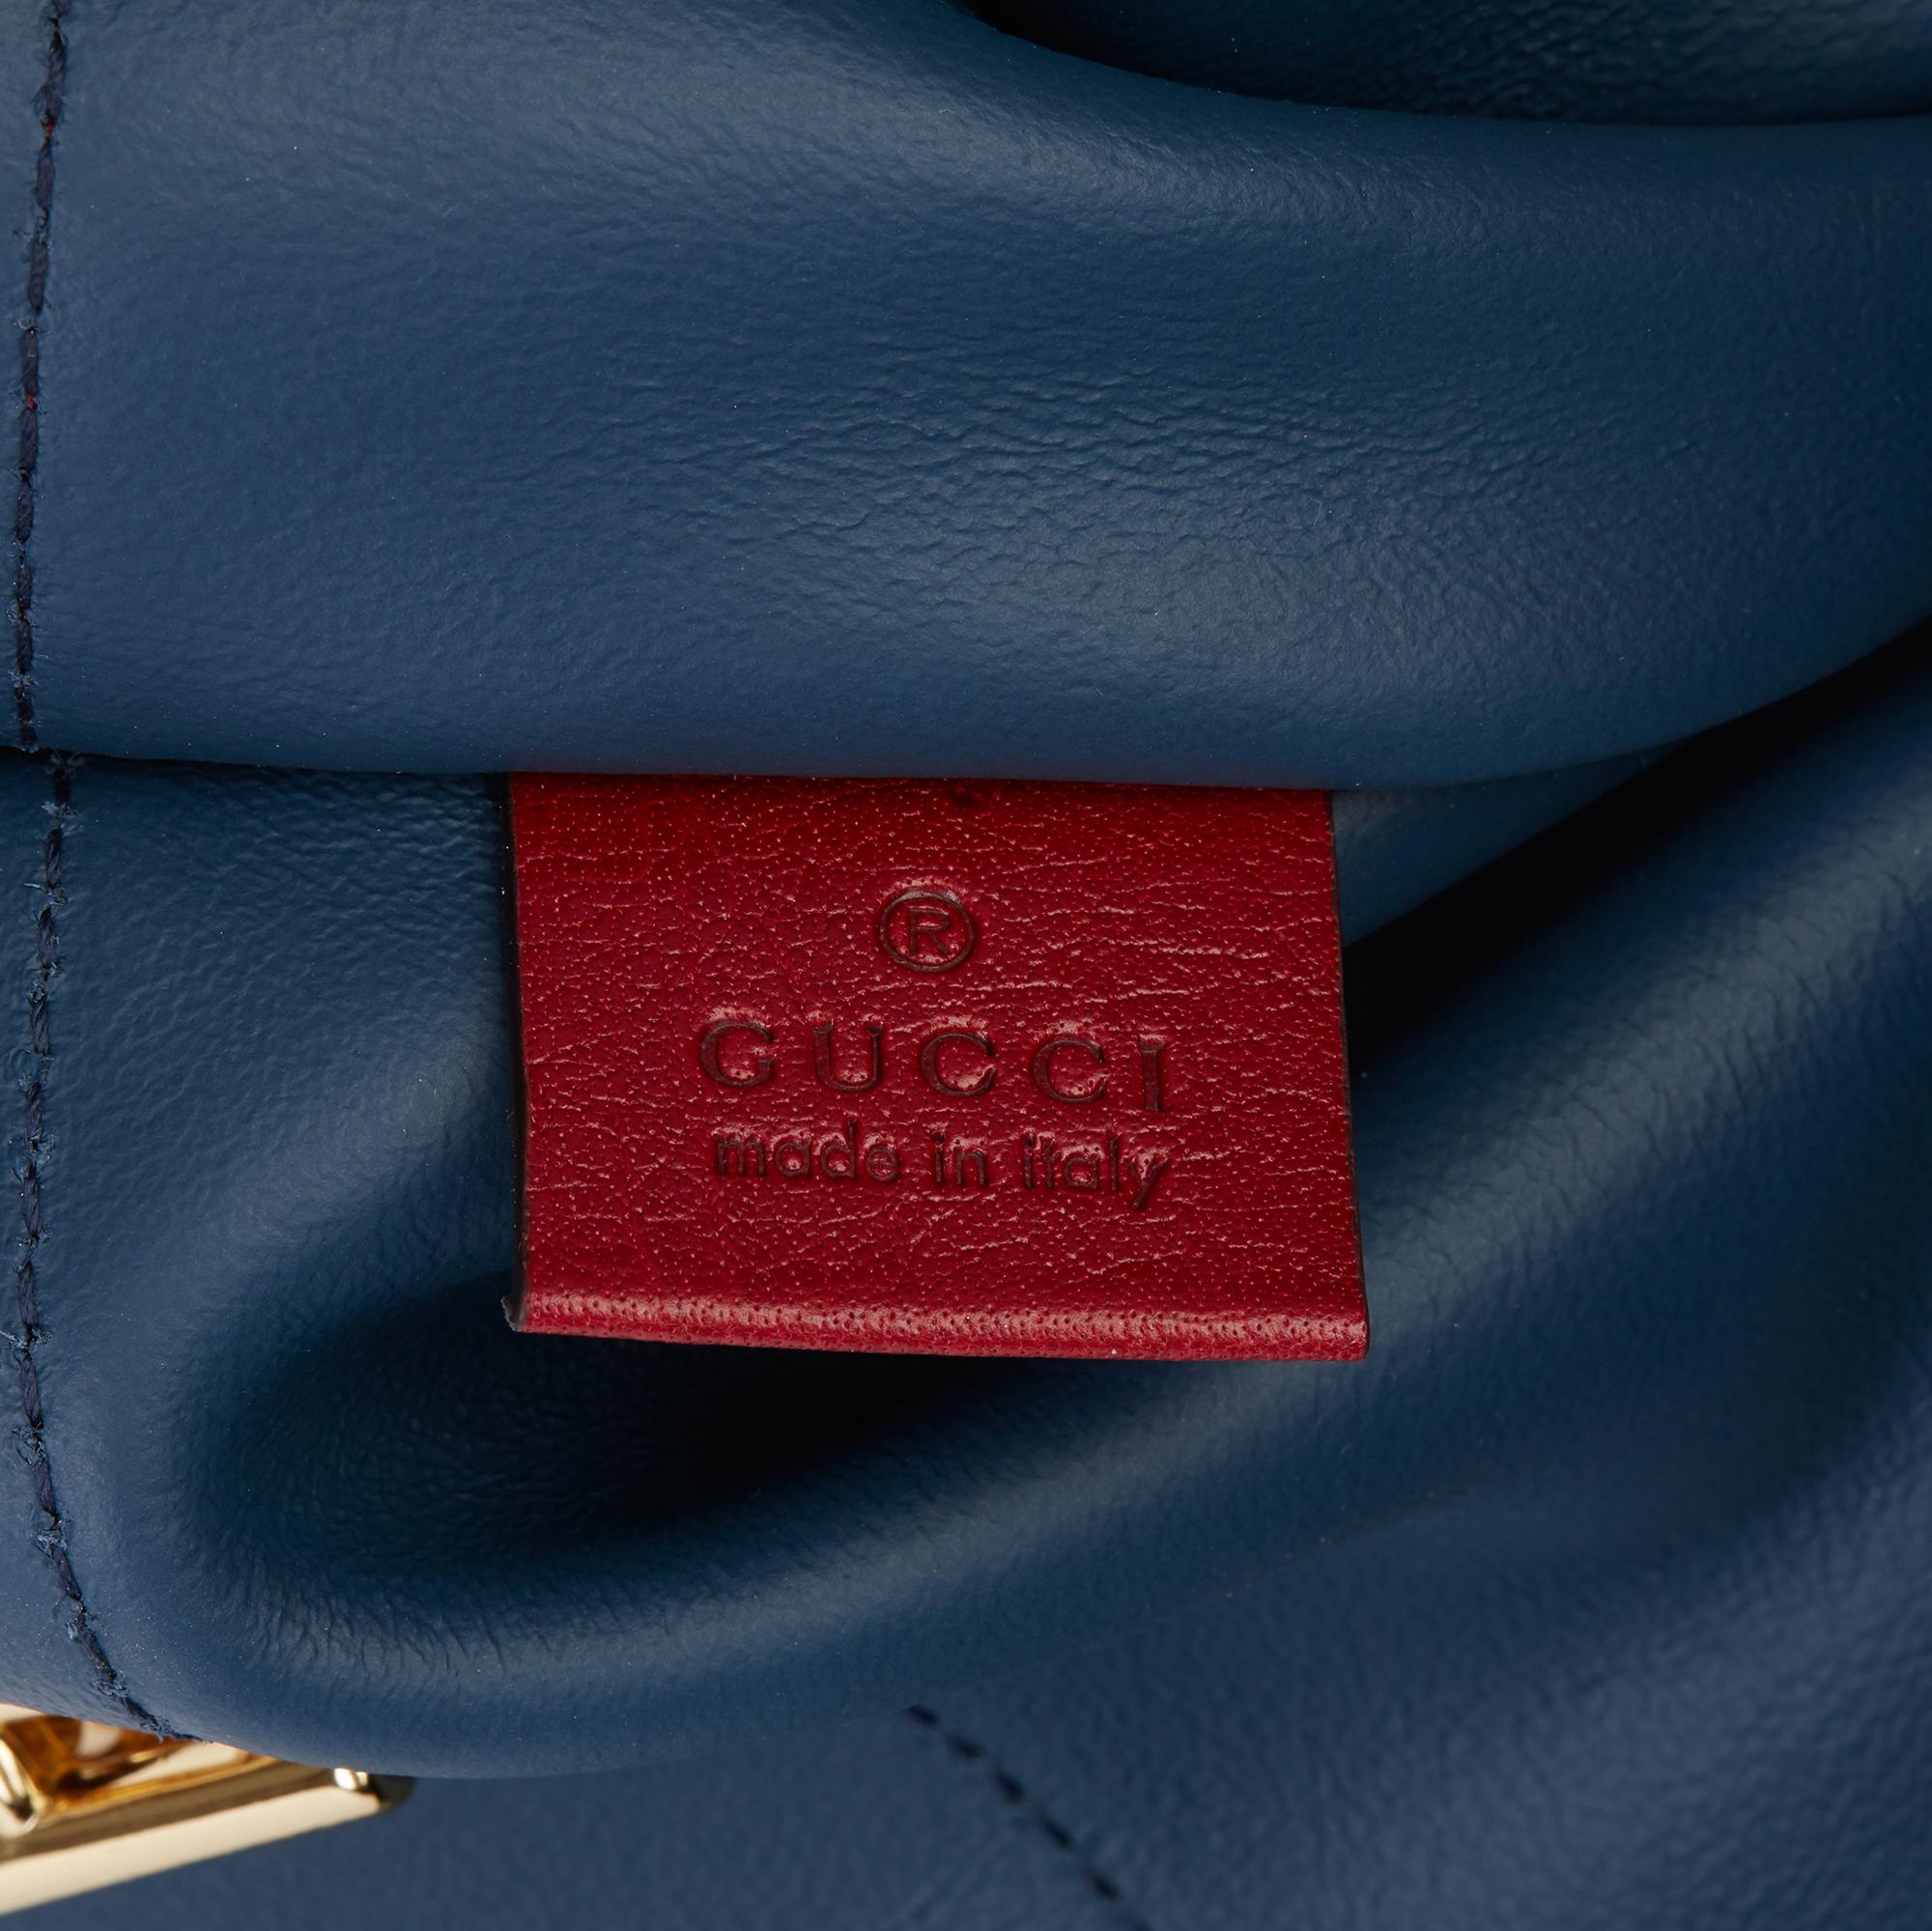 GUCCI
Red Aged Calfskin Leather & Blue Suede Web Large Rajah Tote

Xupes Reference: HB3499
Serial Number: 537219 498879
Age (Circa): 2020
Accompanied By: Gucci Dust Bag
Authenticity Details: Date Stamp (Made in Italy)
Gender: Ladies
Type: Shoulder,